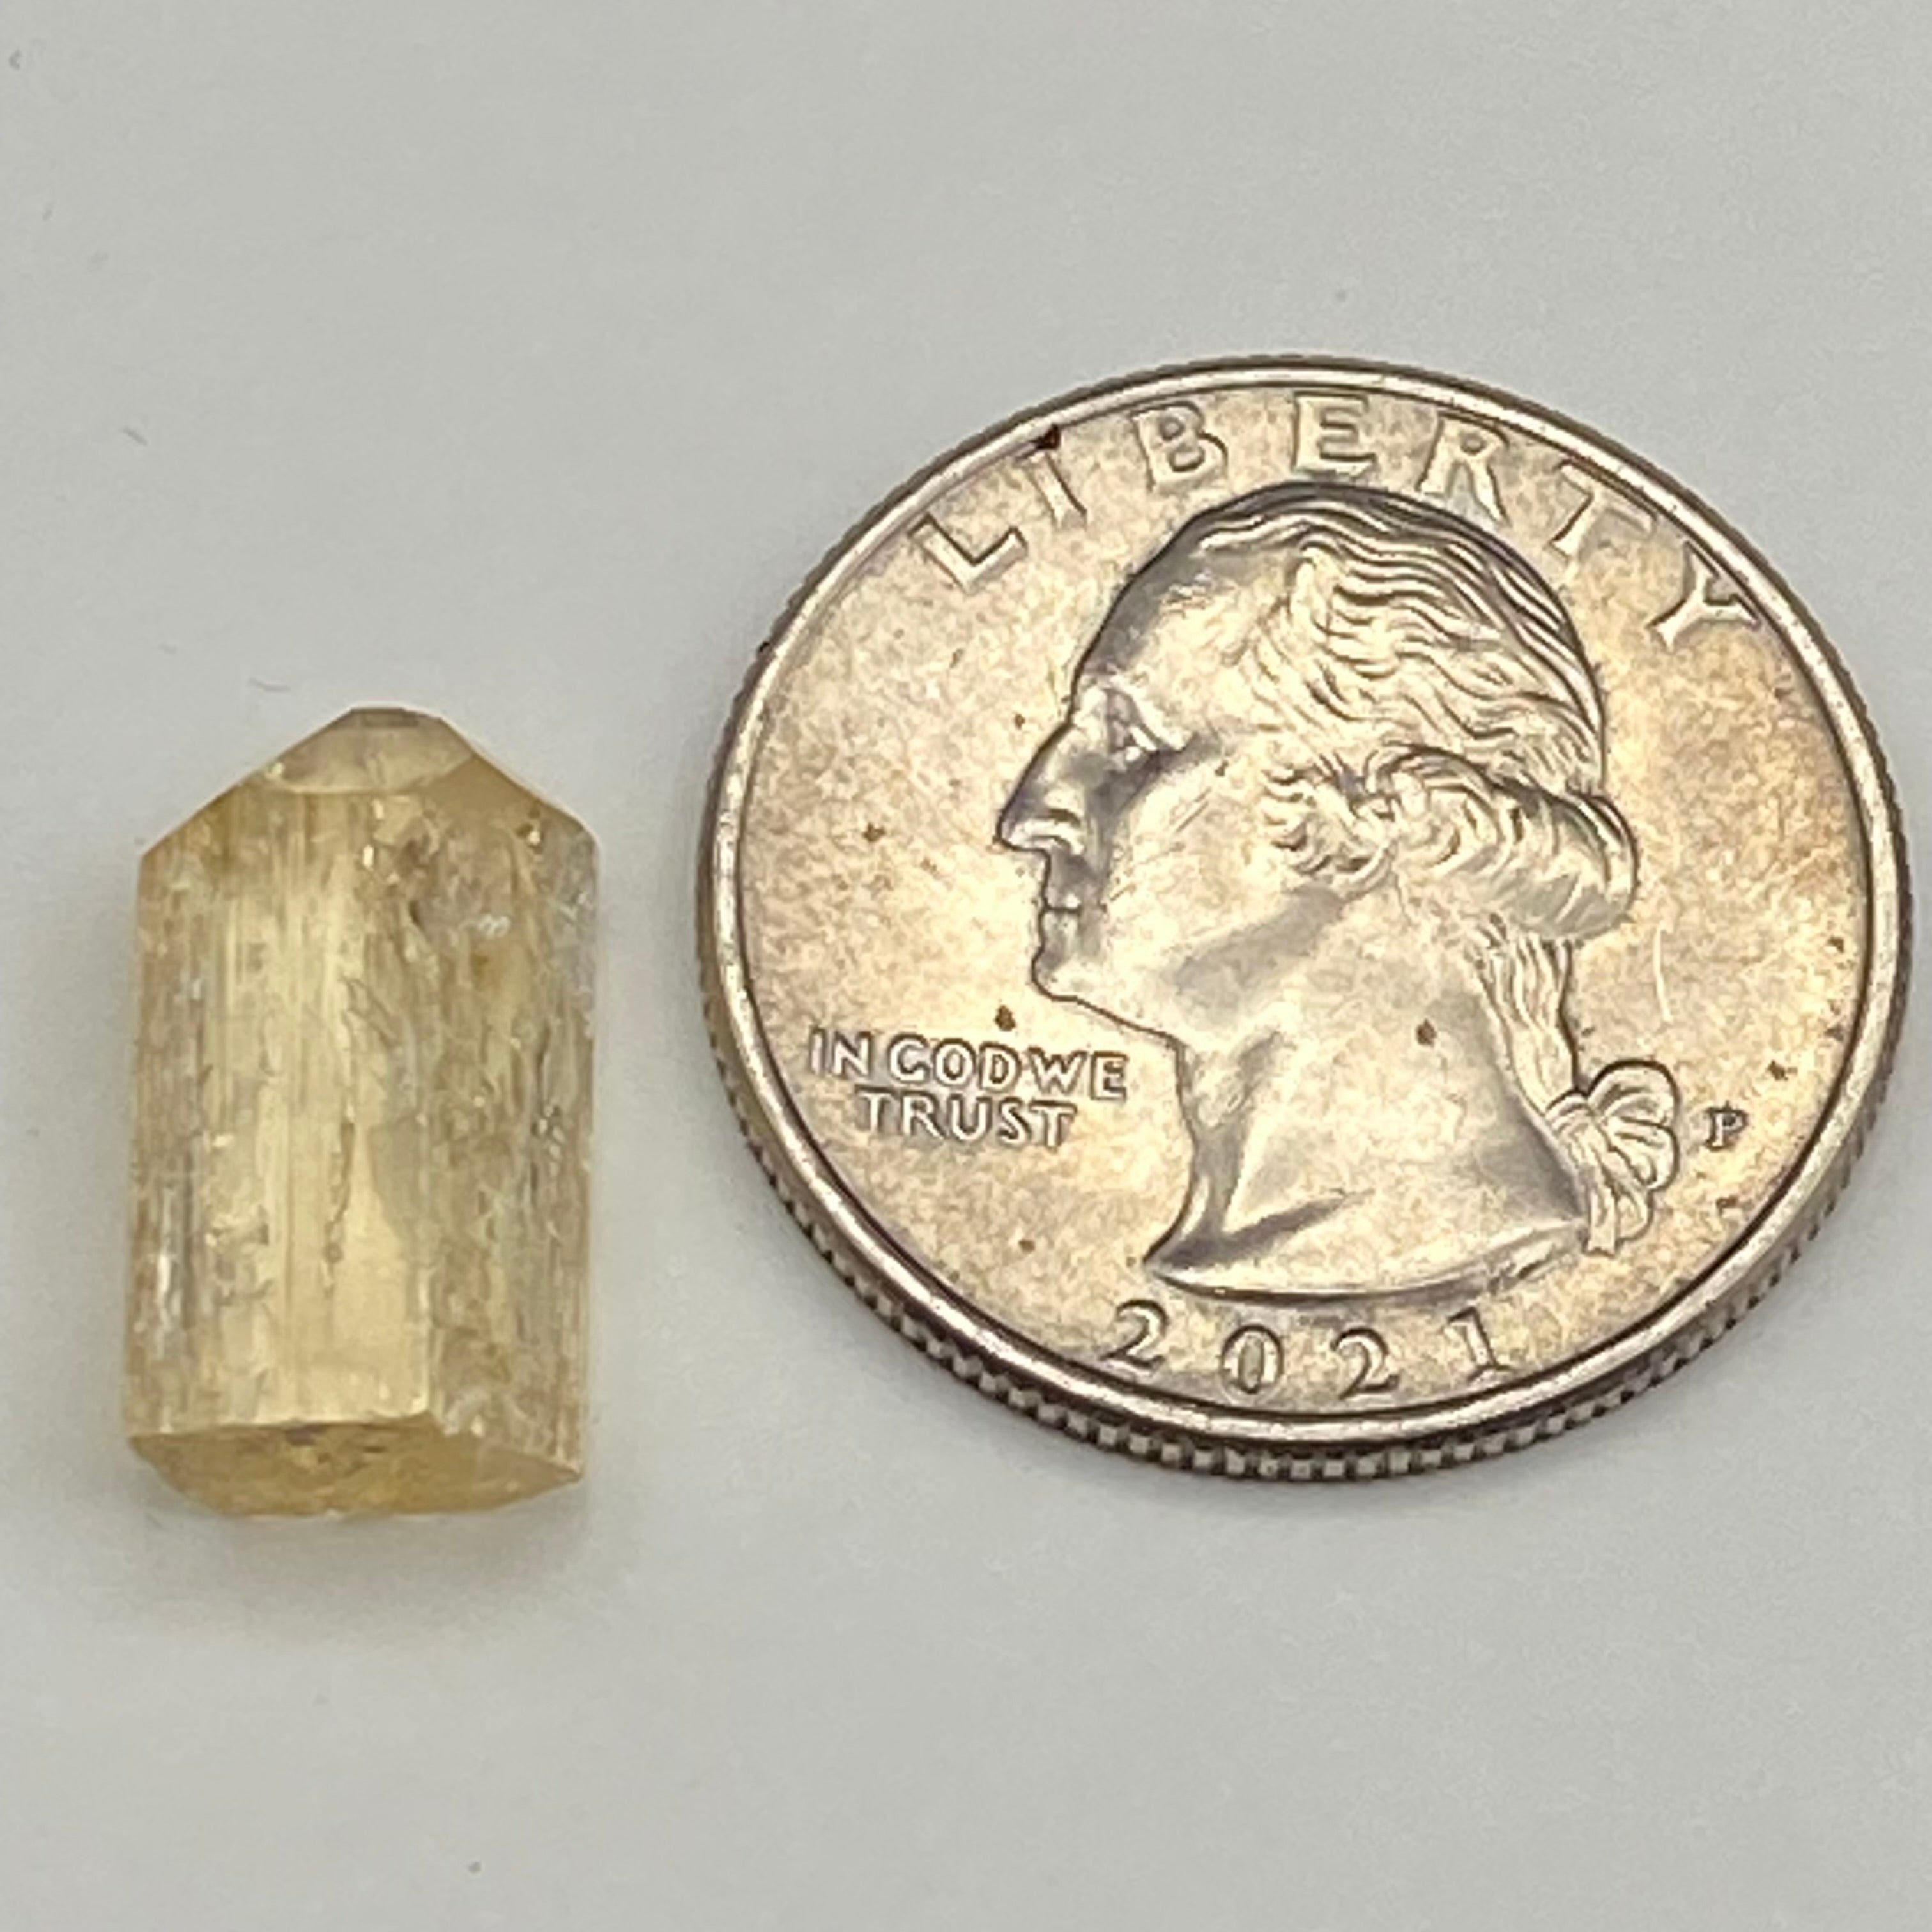 Imperial Topaz Natural Full Terminated Crystal - 162